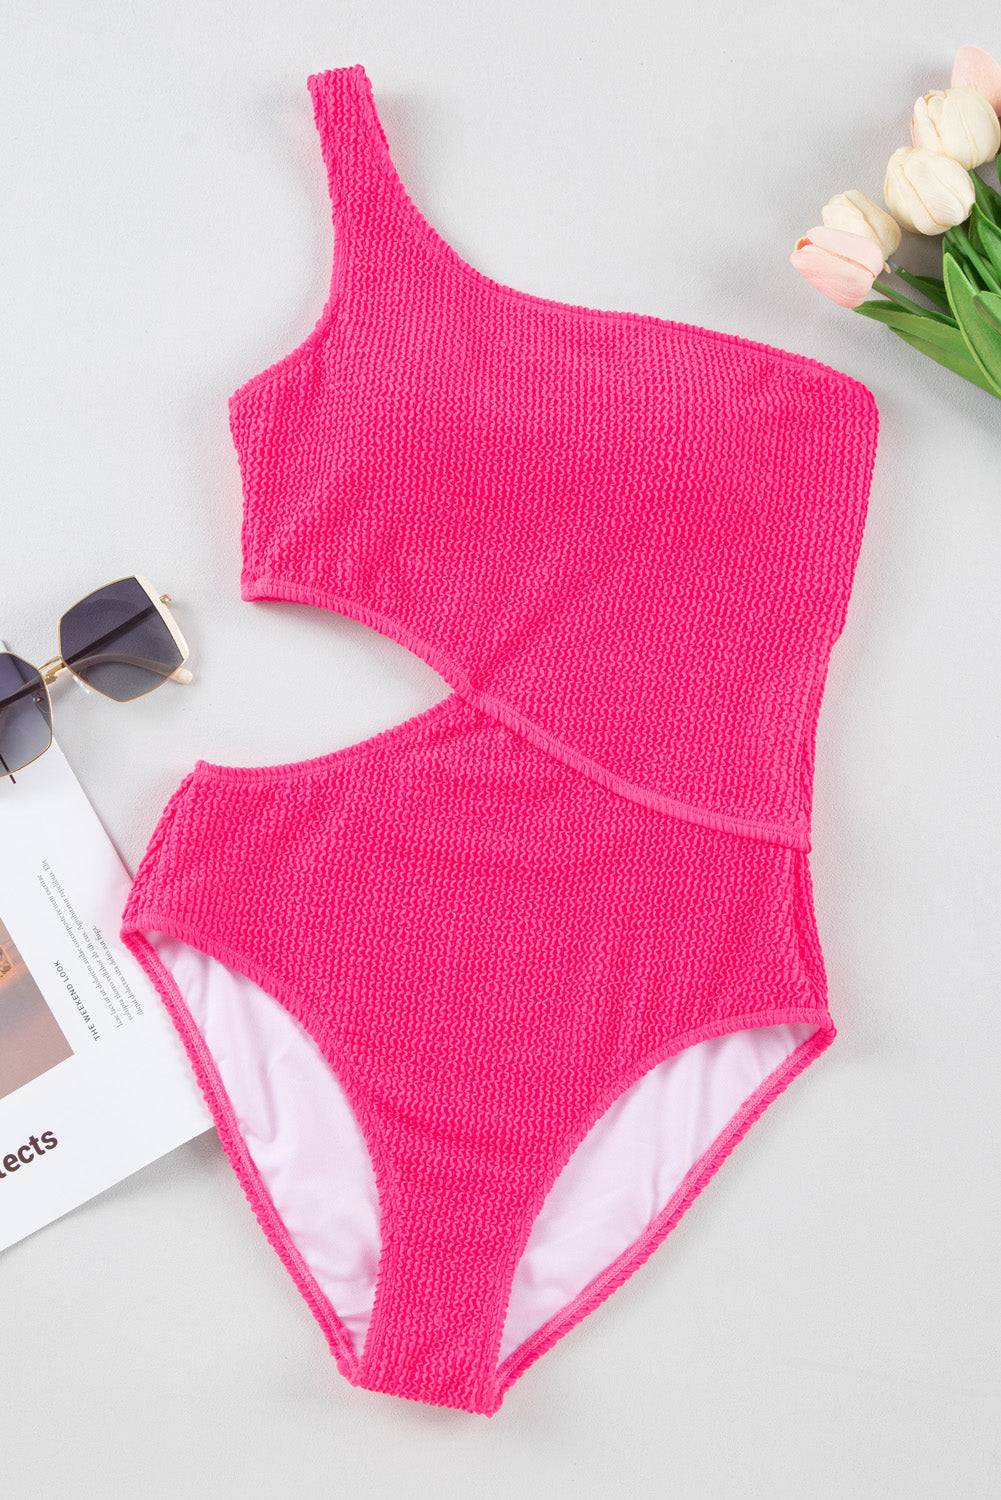 a pink one piece swimsuit next to a pair of sunglasses